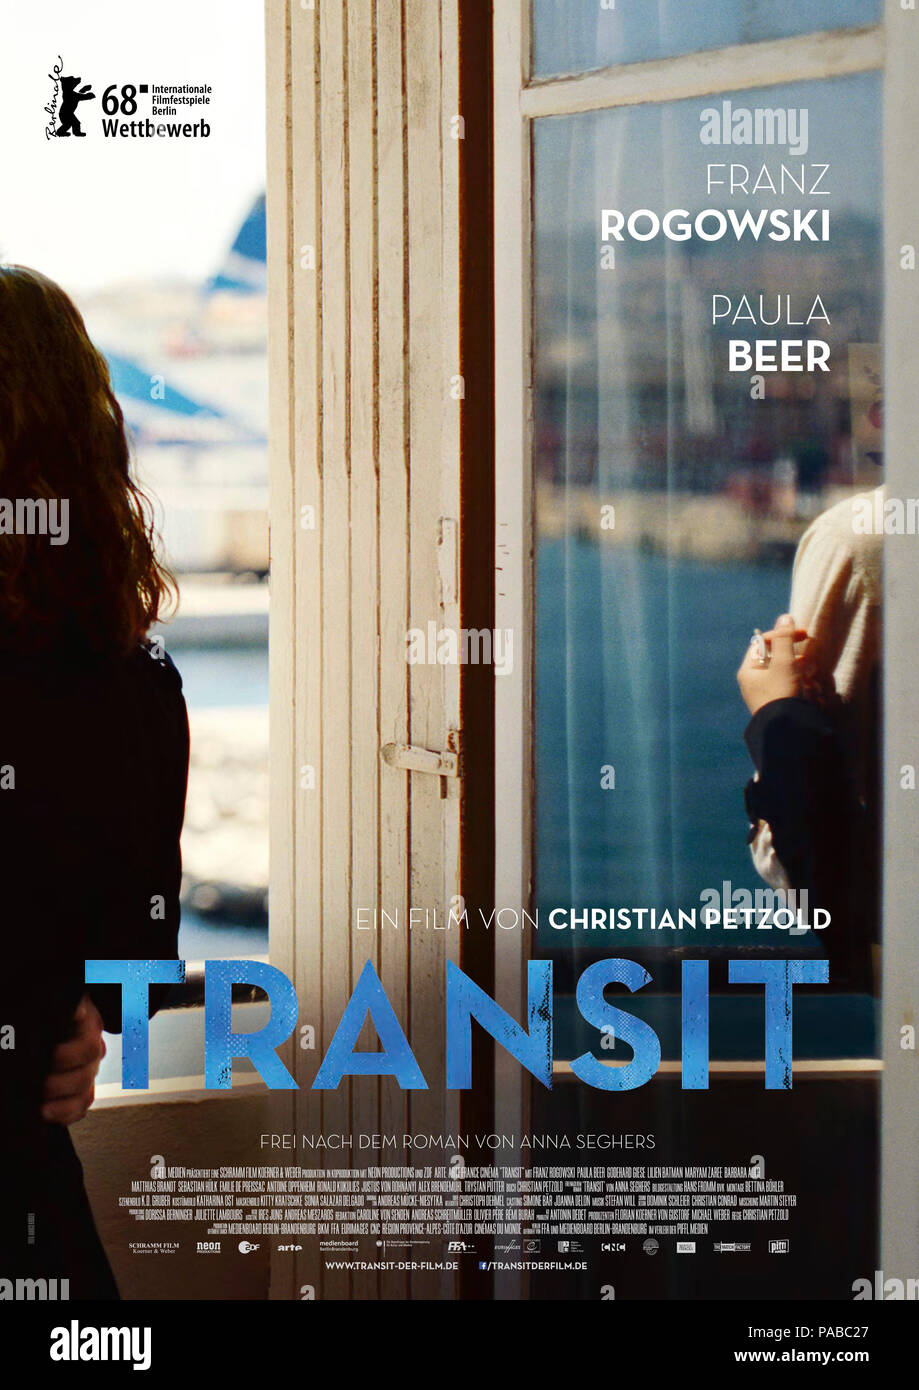 RELEASE DATE: October 11, 2018 TITLE: Transit STUDIO: Imagine Films DIRECTOR: Christian Petzold PLOT: When a man flees France after the Nazi invasion, he assumes the identity of a dead author whose papers he possesses. Stuck in Marseilles, he meets a young woman desperate to find her missing husband, the very man he's impersonating. STARRING: Poster art. (Credit Image: © Imagine Films/Entertainment Pictures) Stock Photo